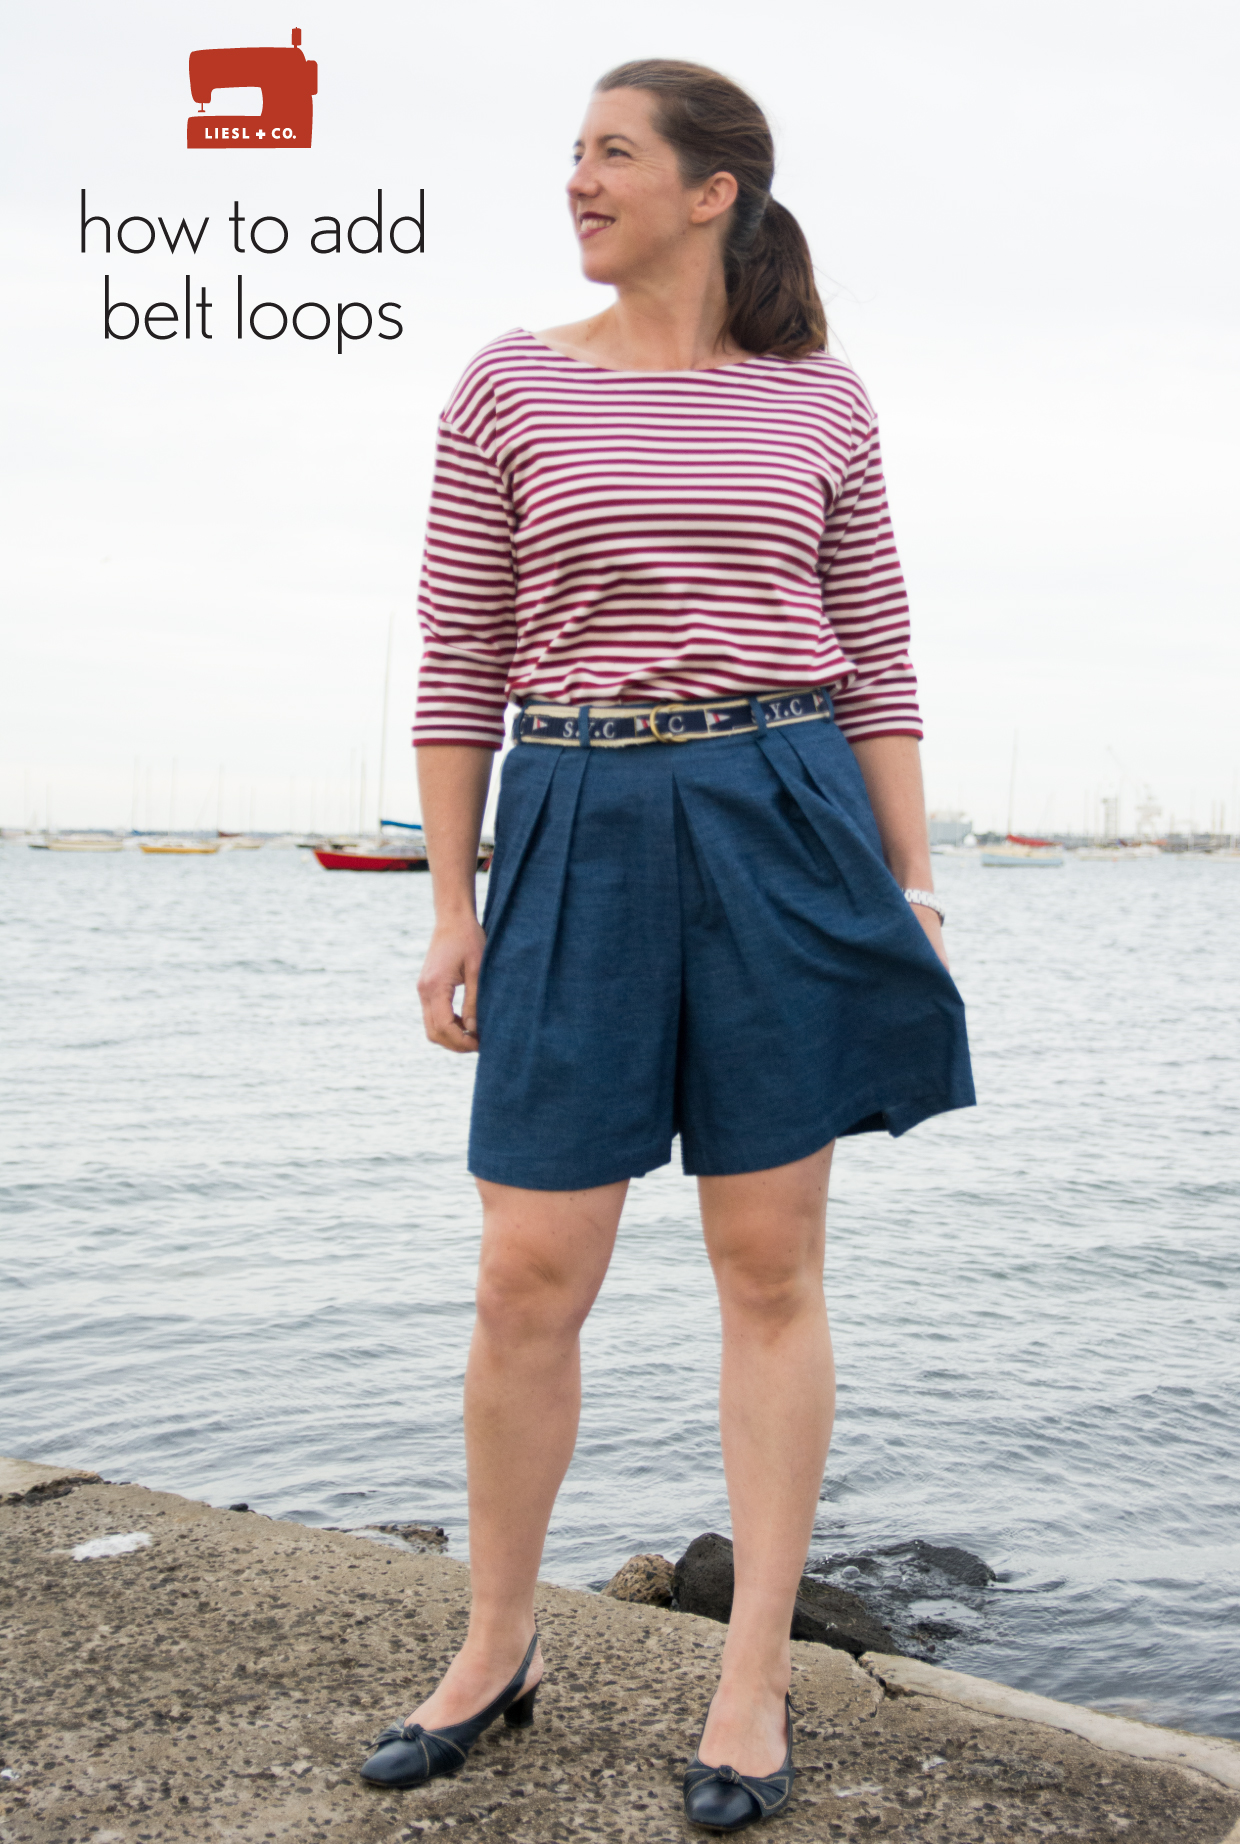 Belt loops and waistbands – Catherine Daze's Blog